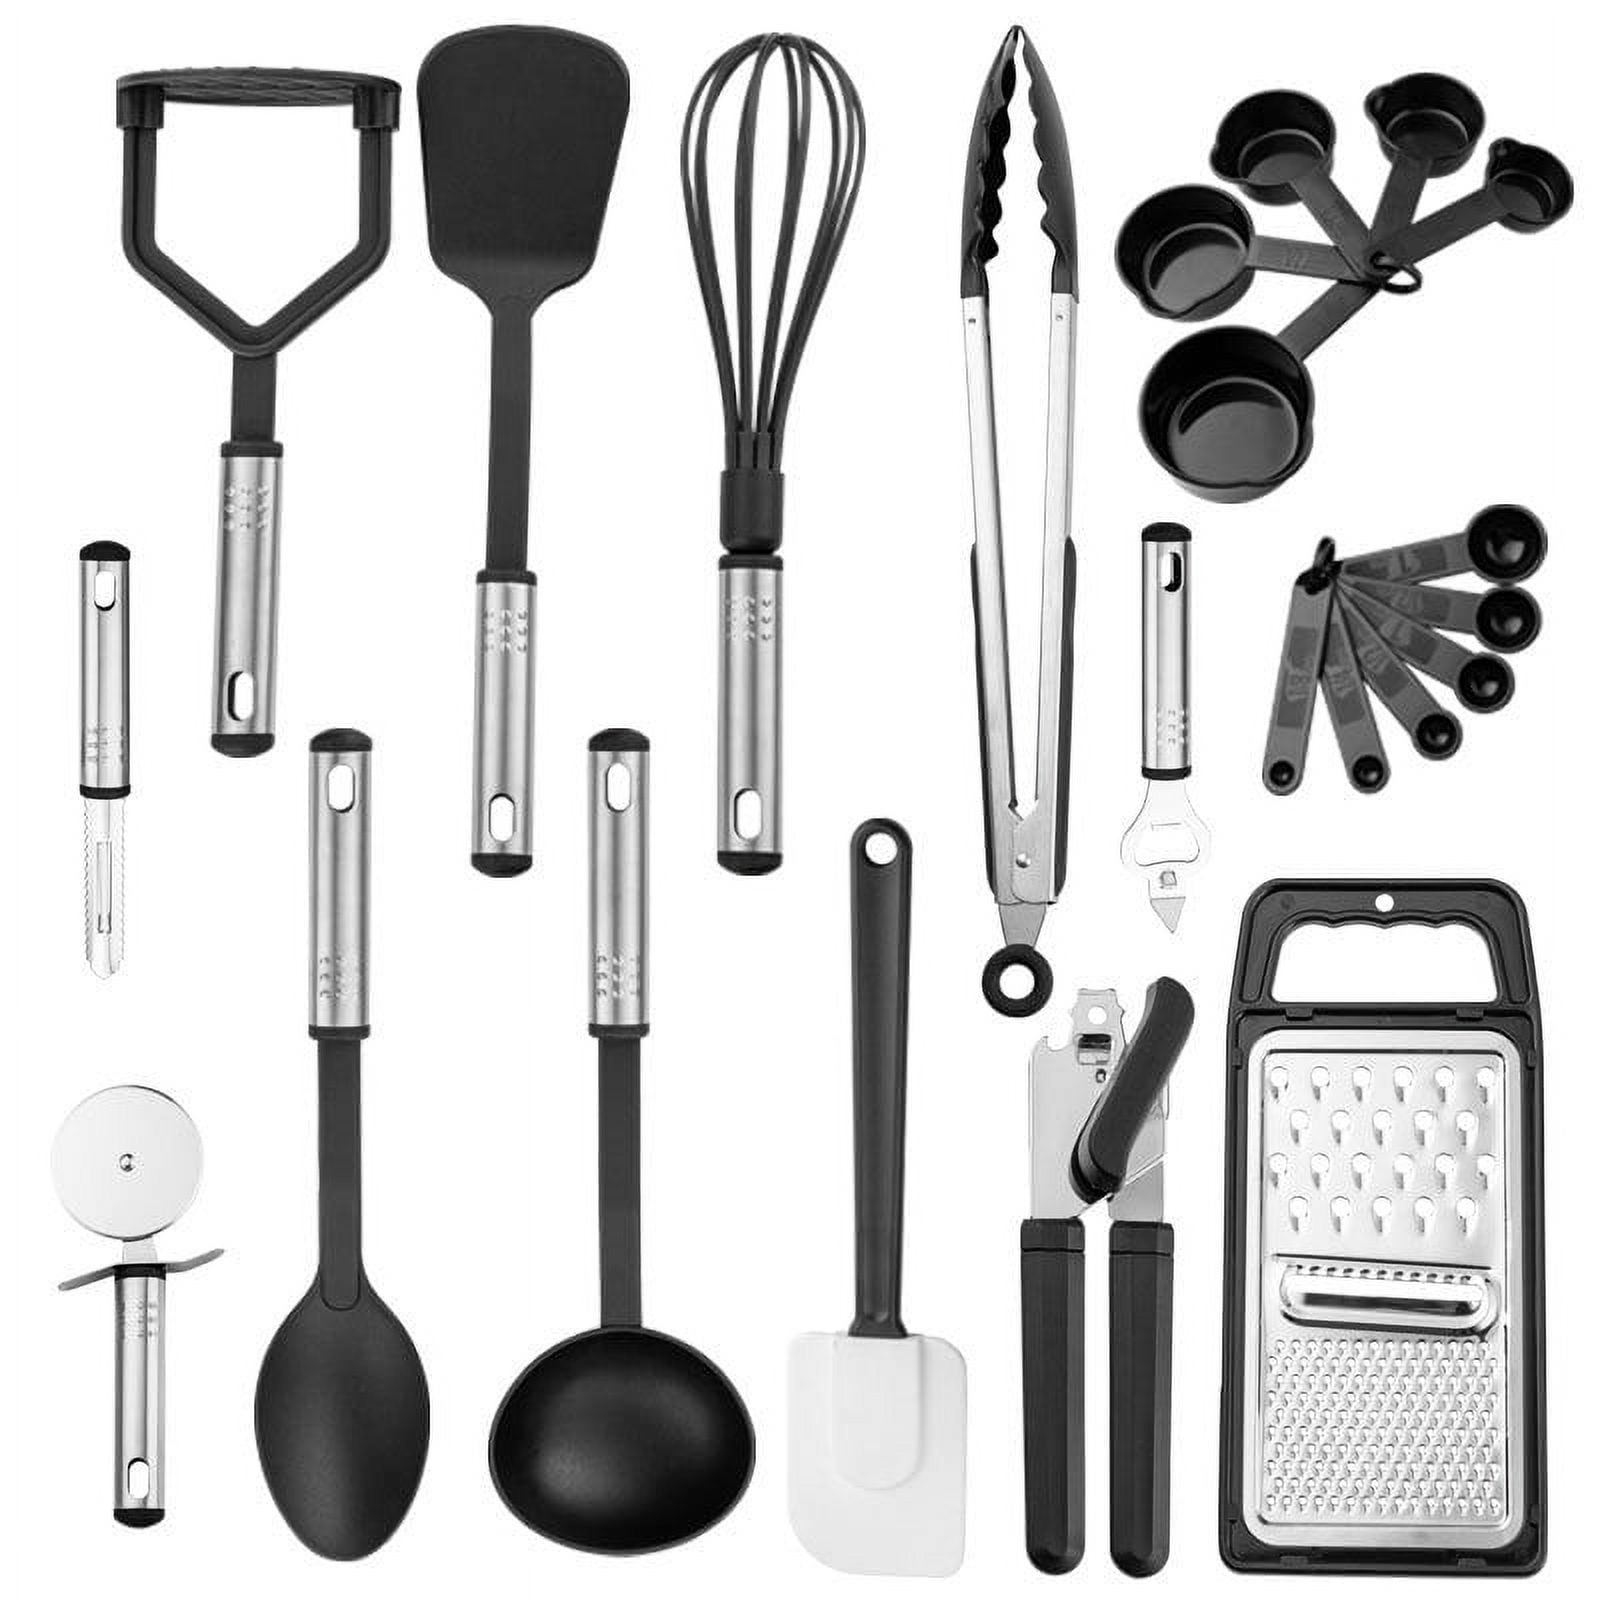 Cooking tool sets Non-toxic cooking baking kitchen tools utensils